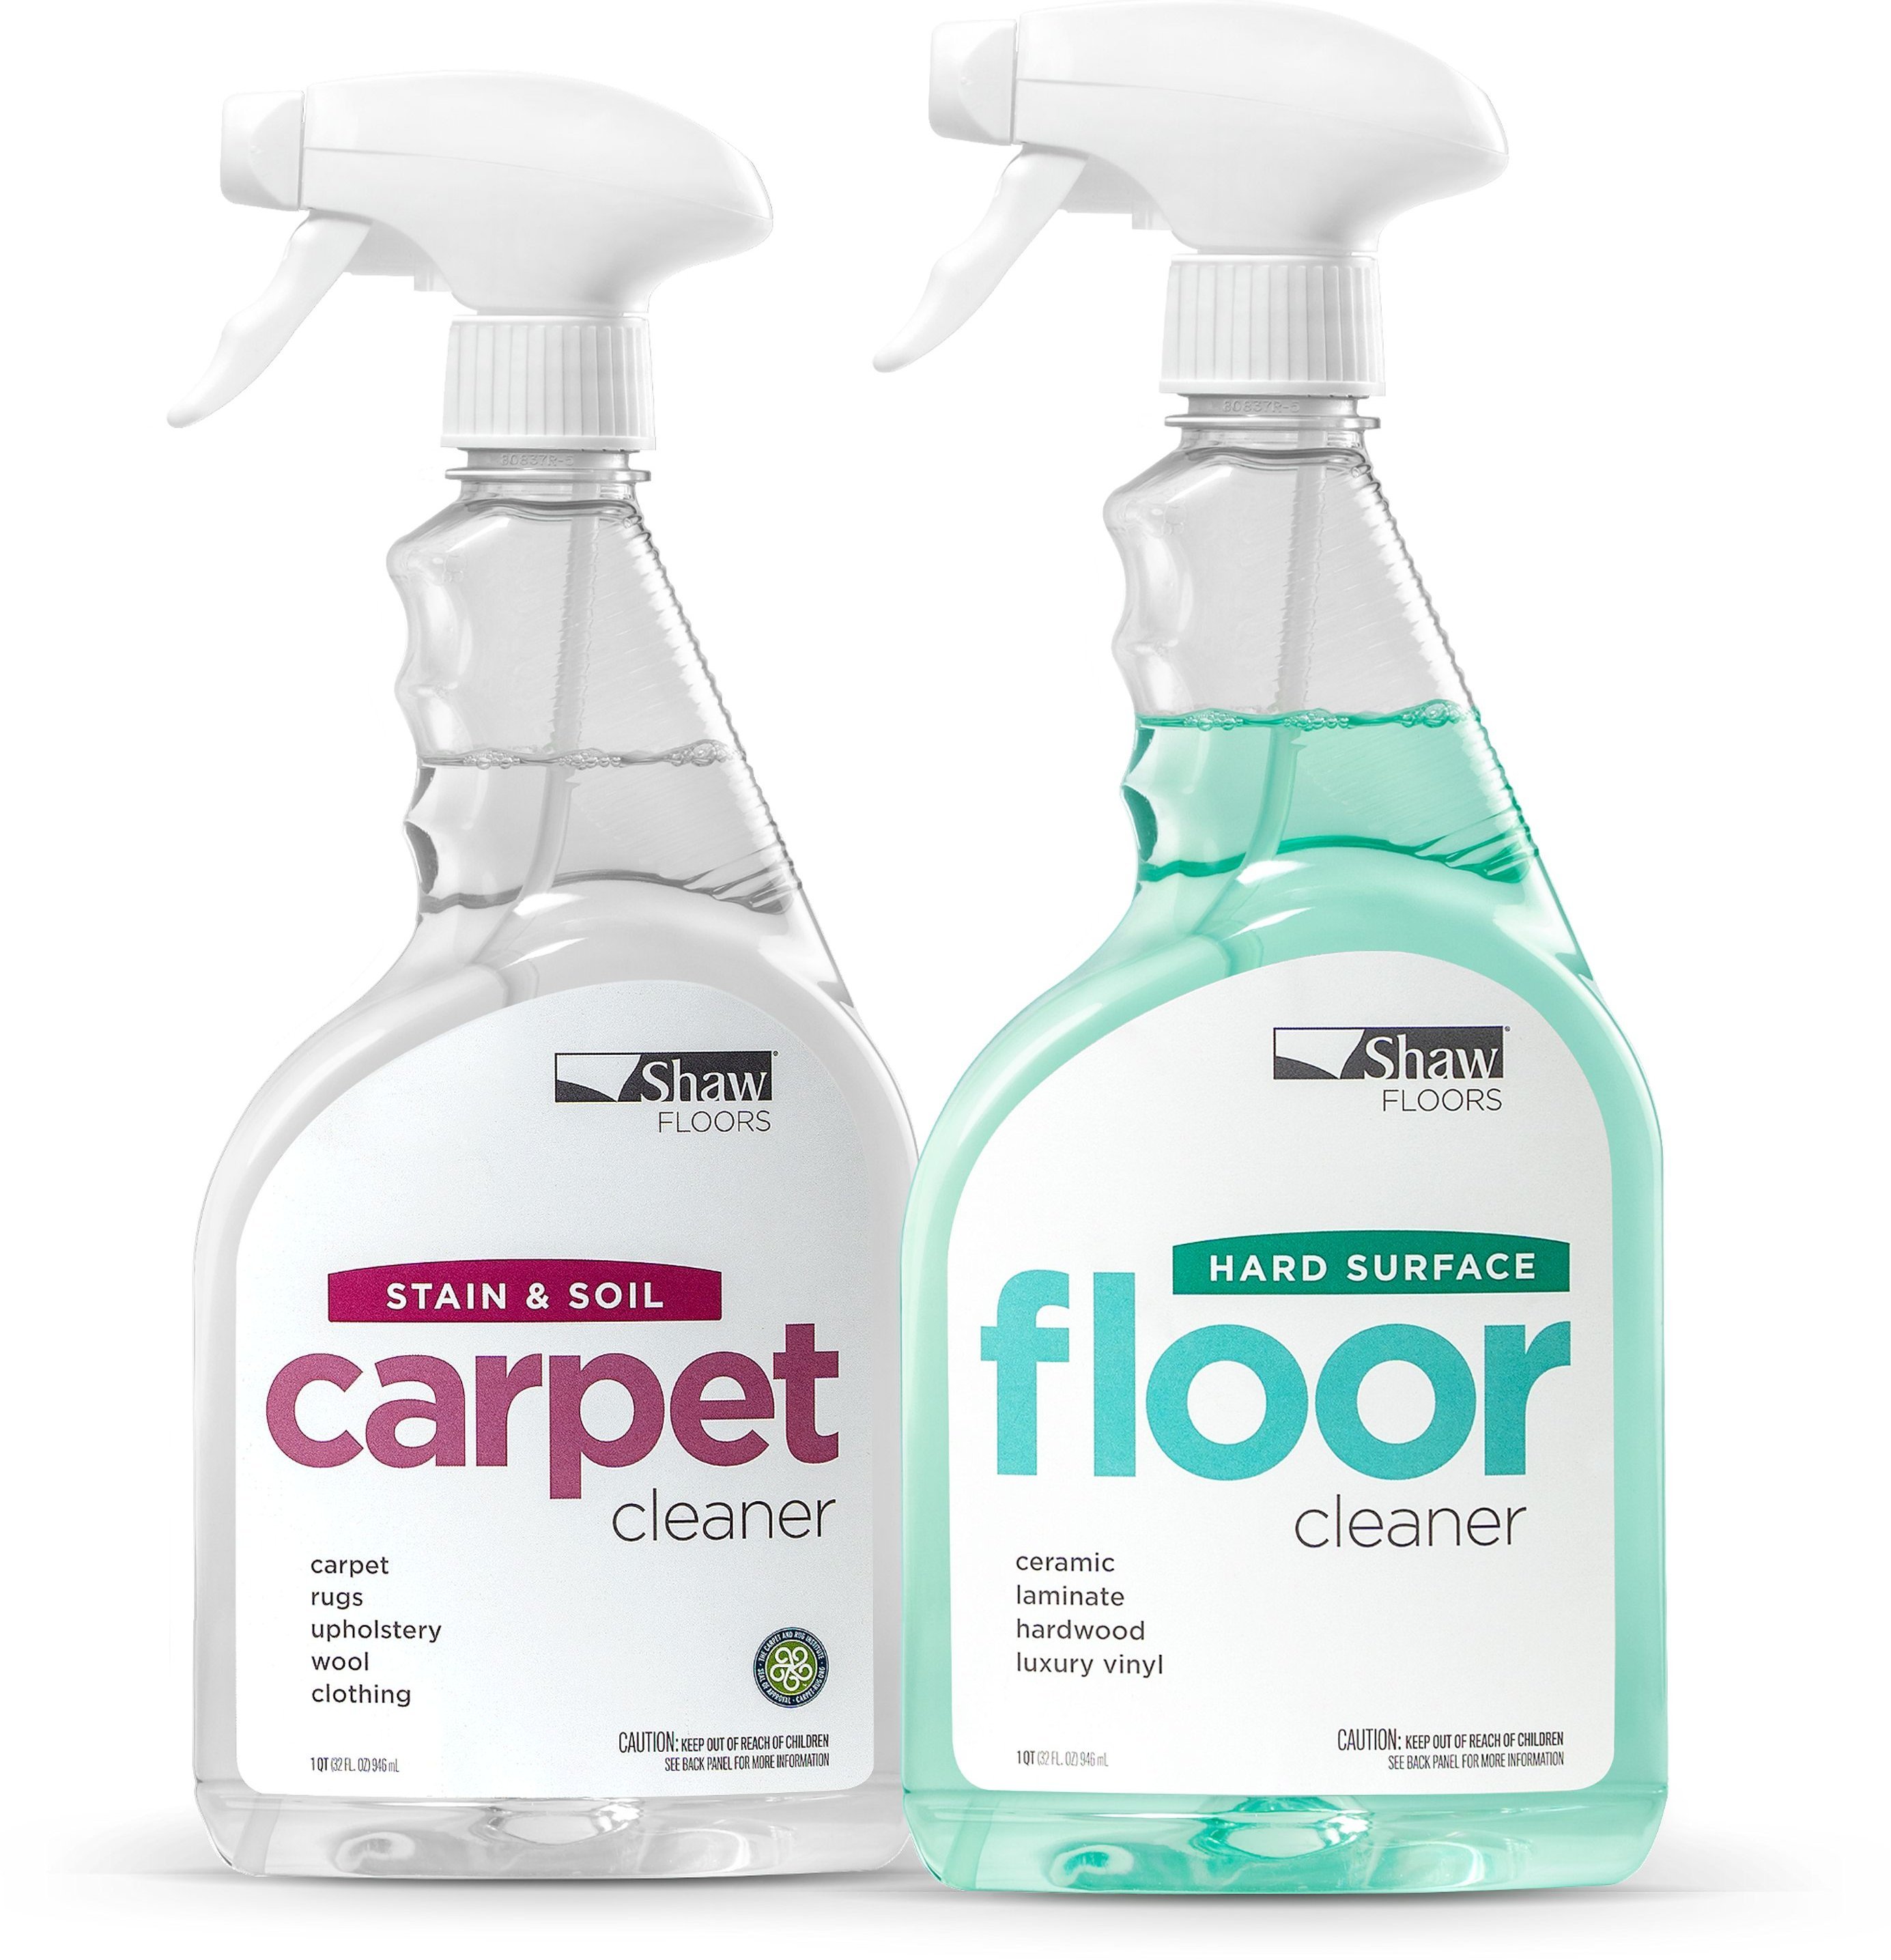 shaw carpet and floor cleaner - USA Carpets in GA